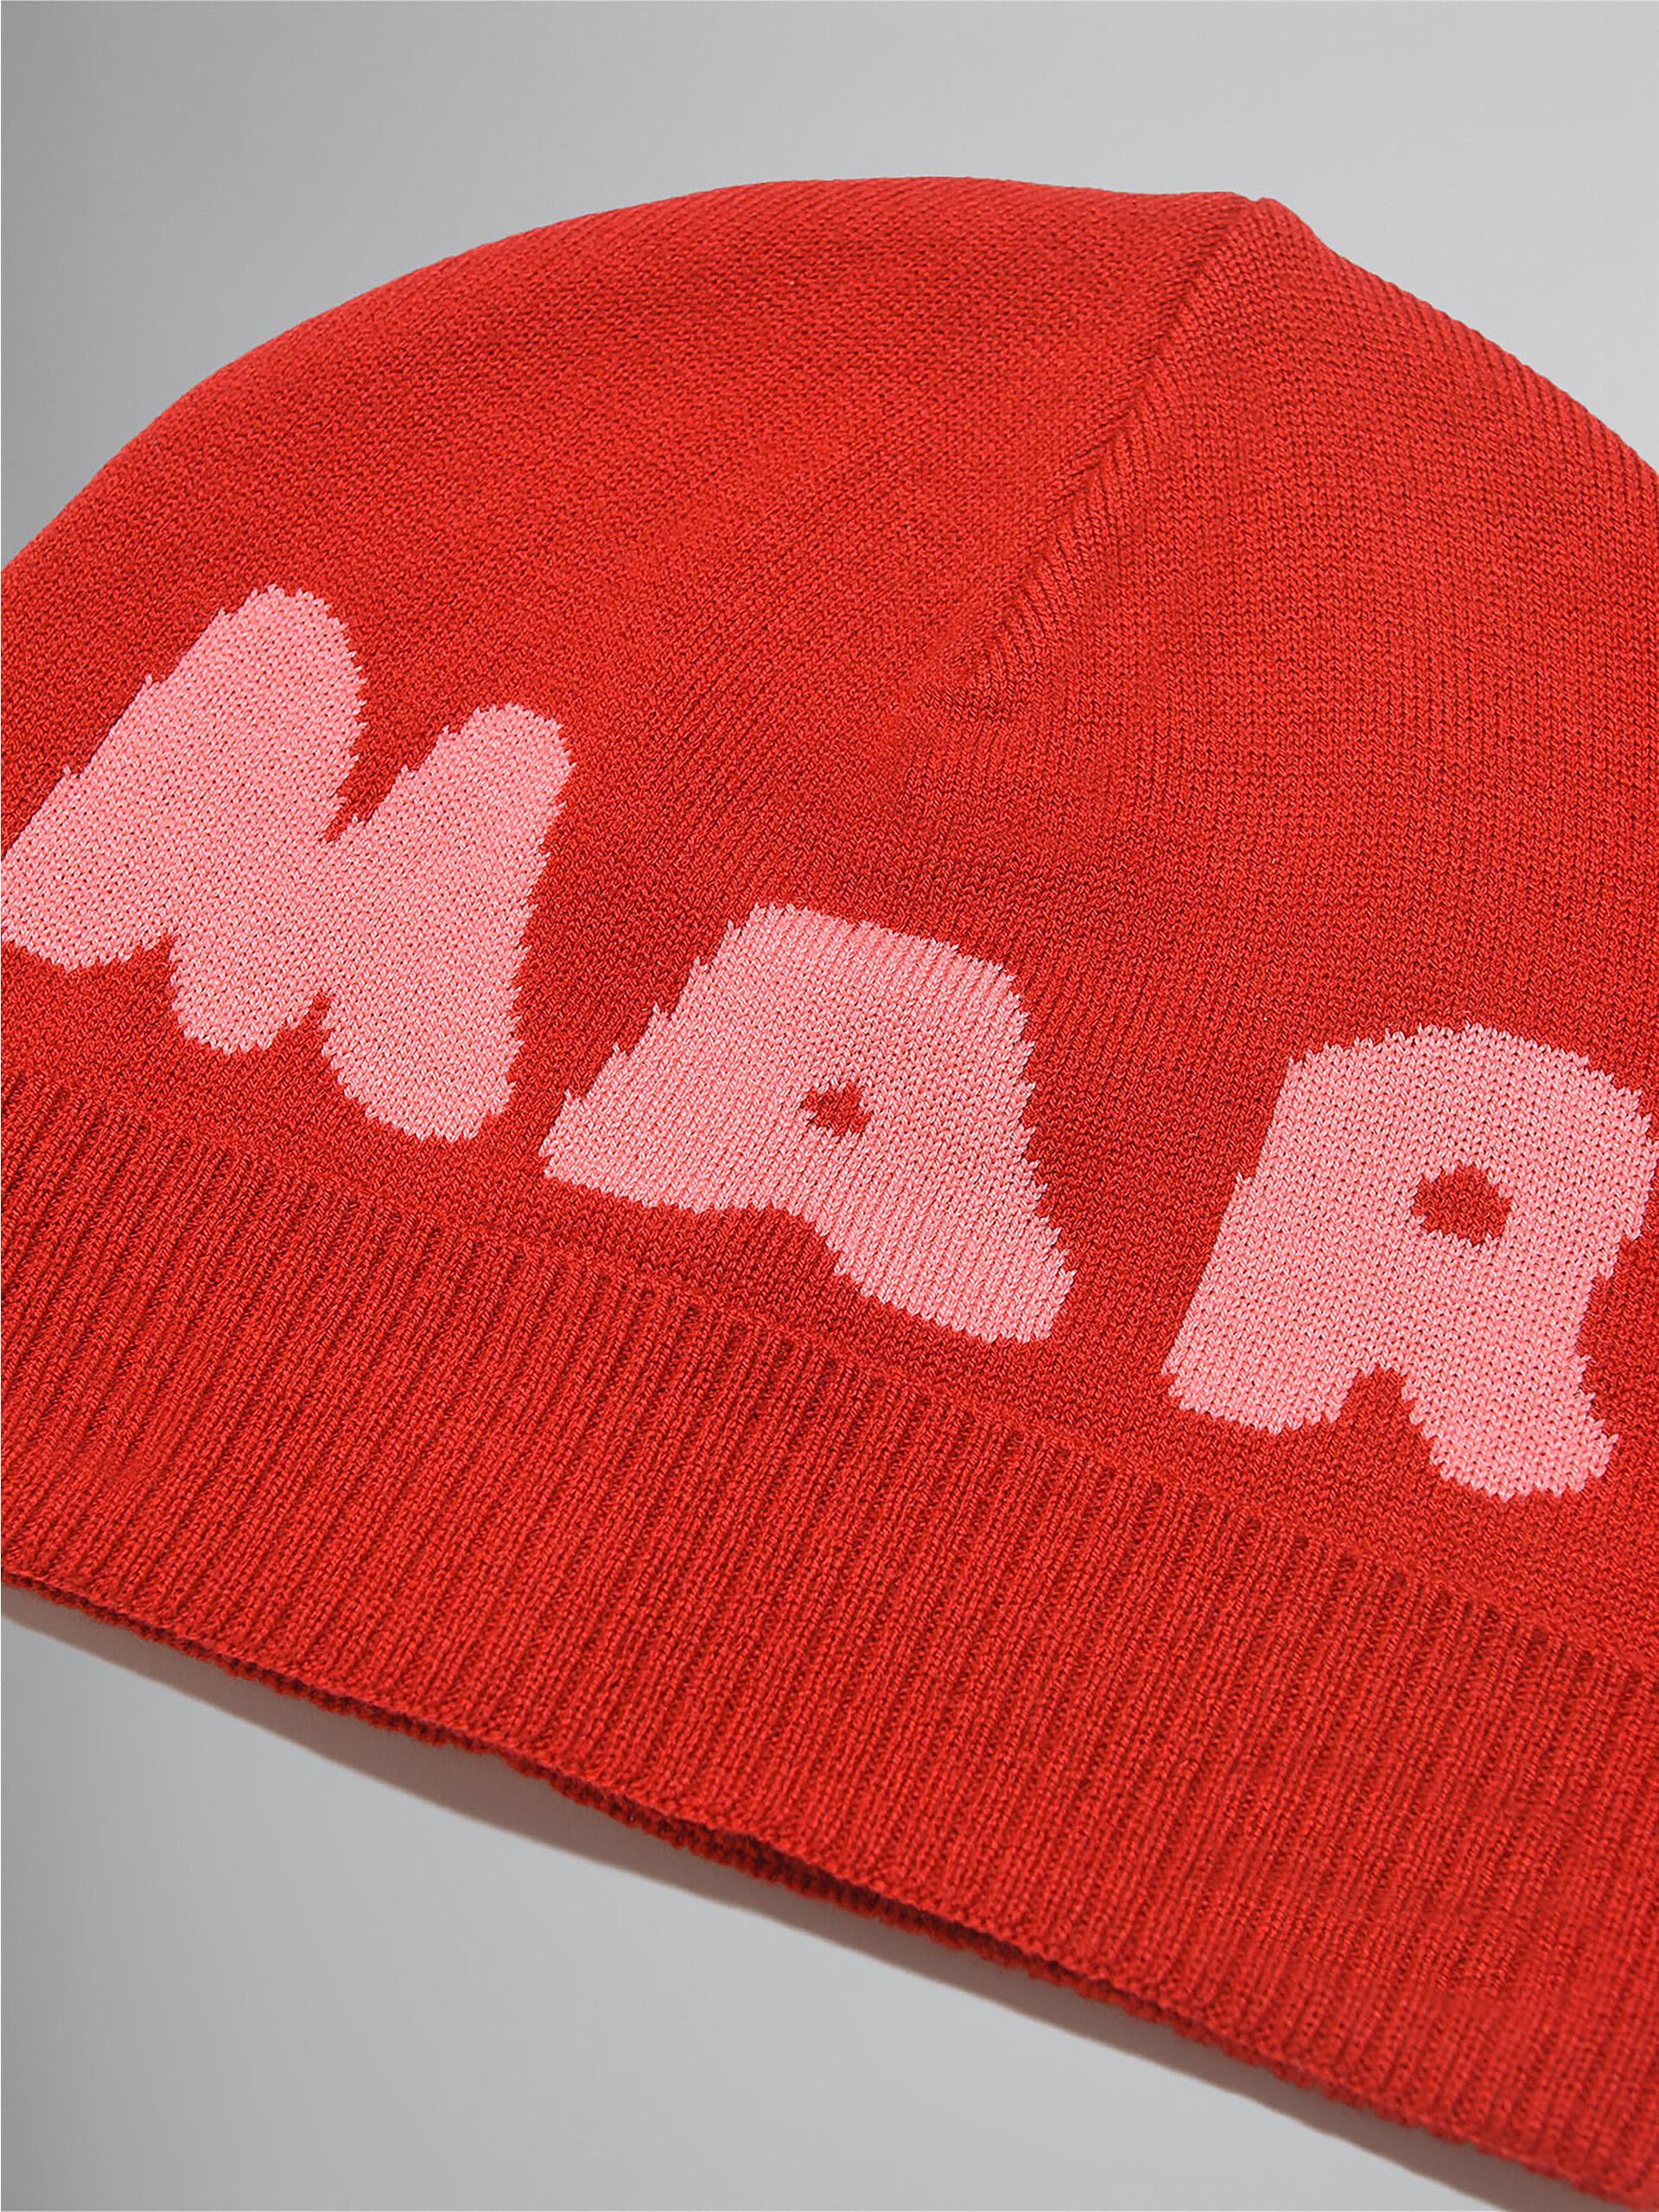 Red cap with inlaid logo | Marni